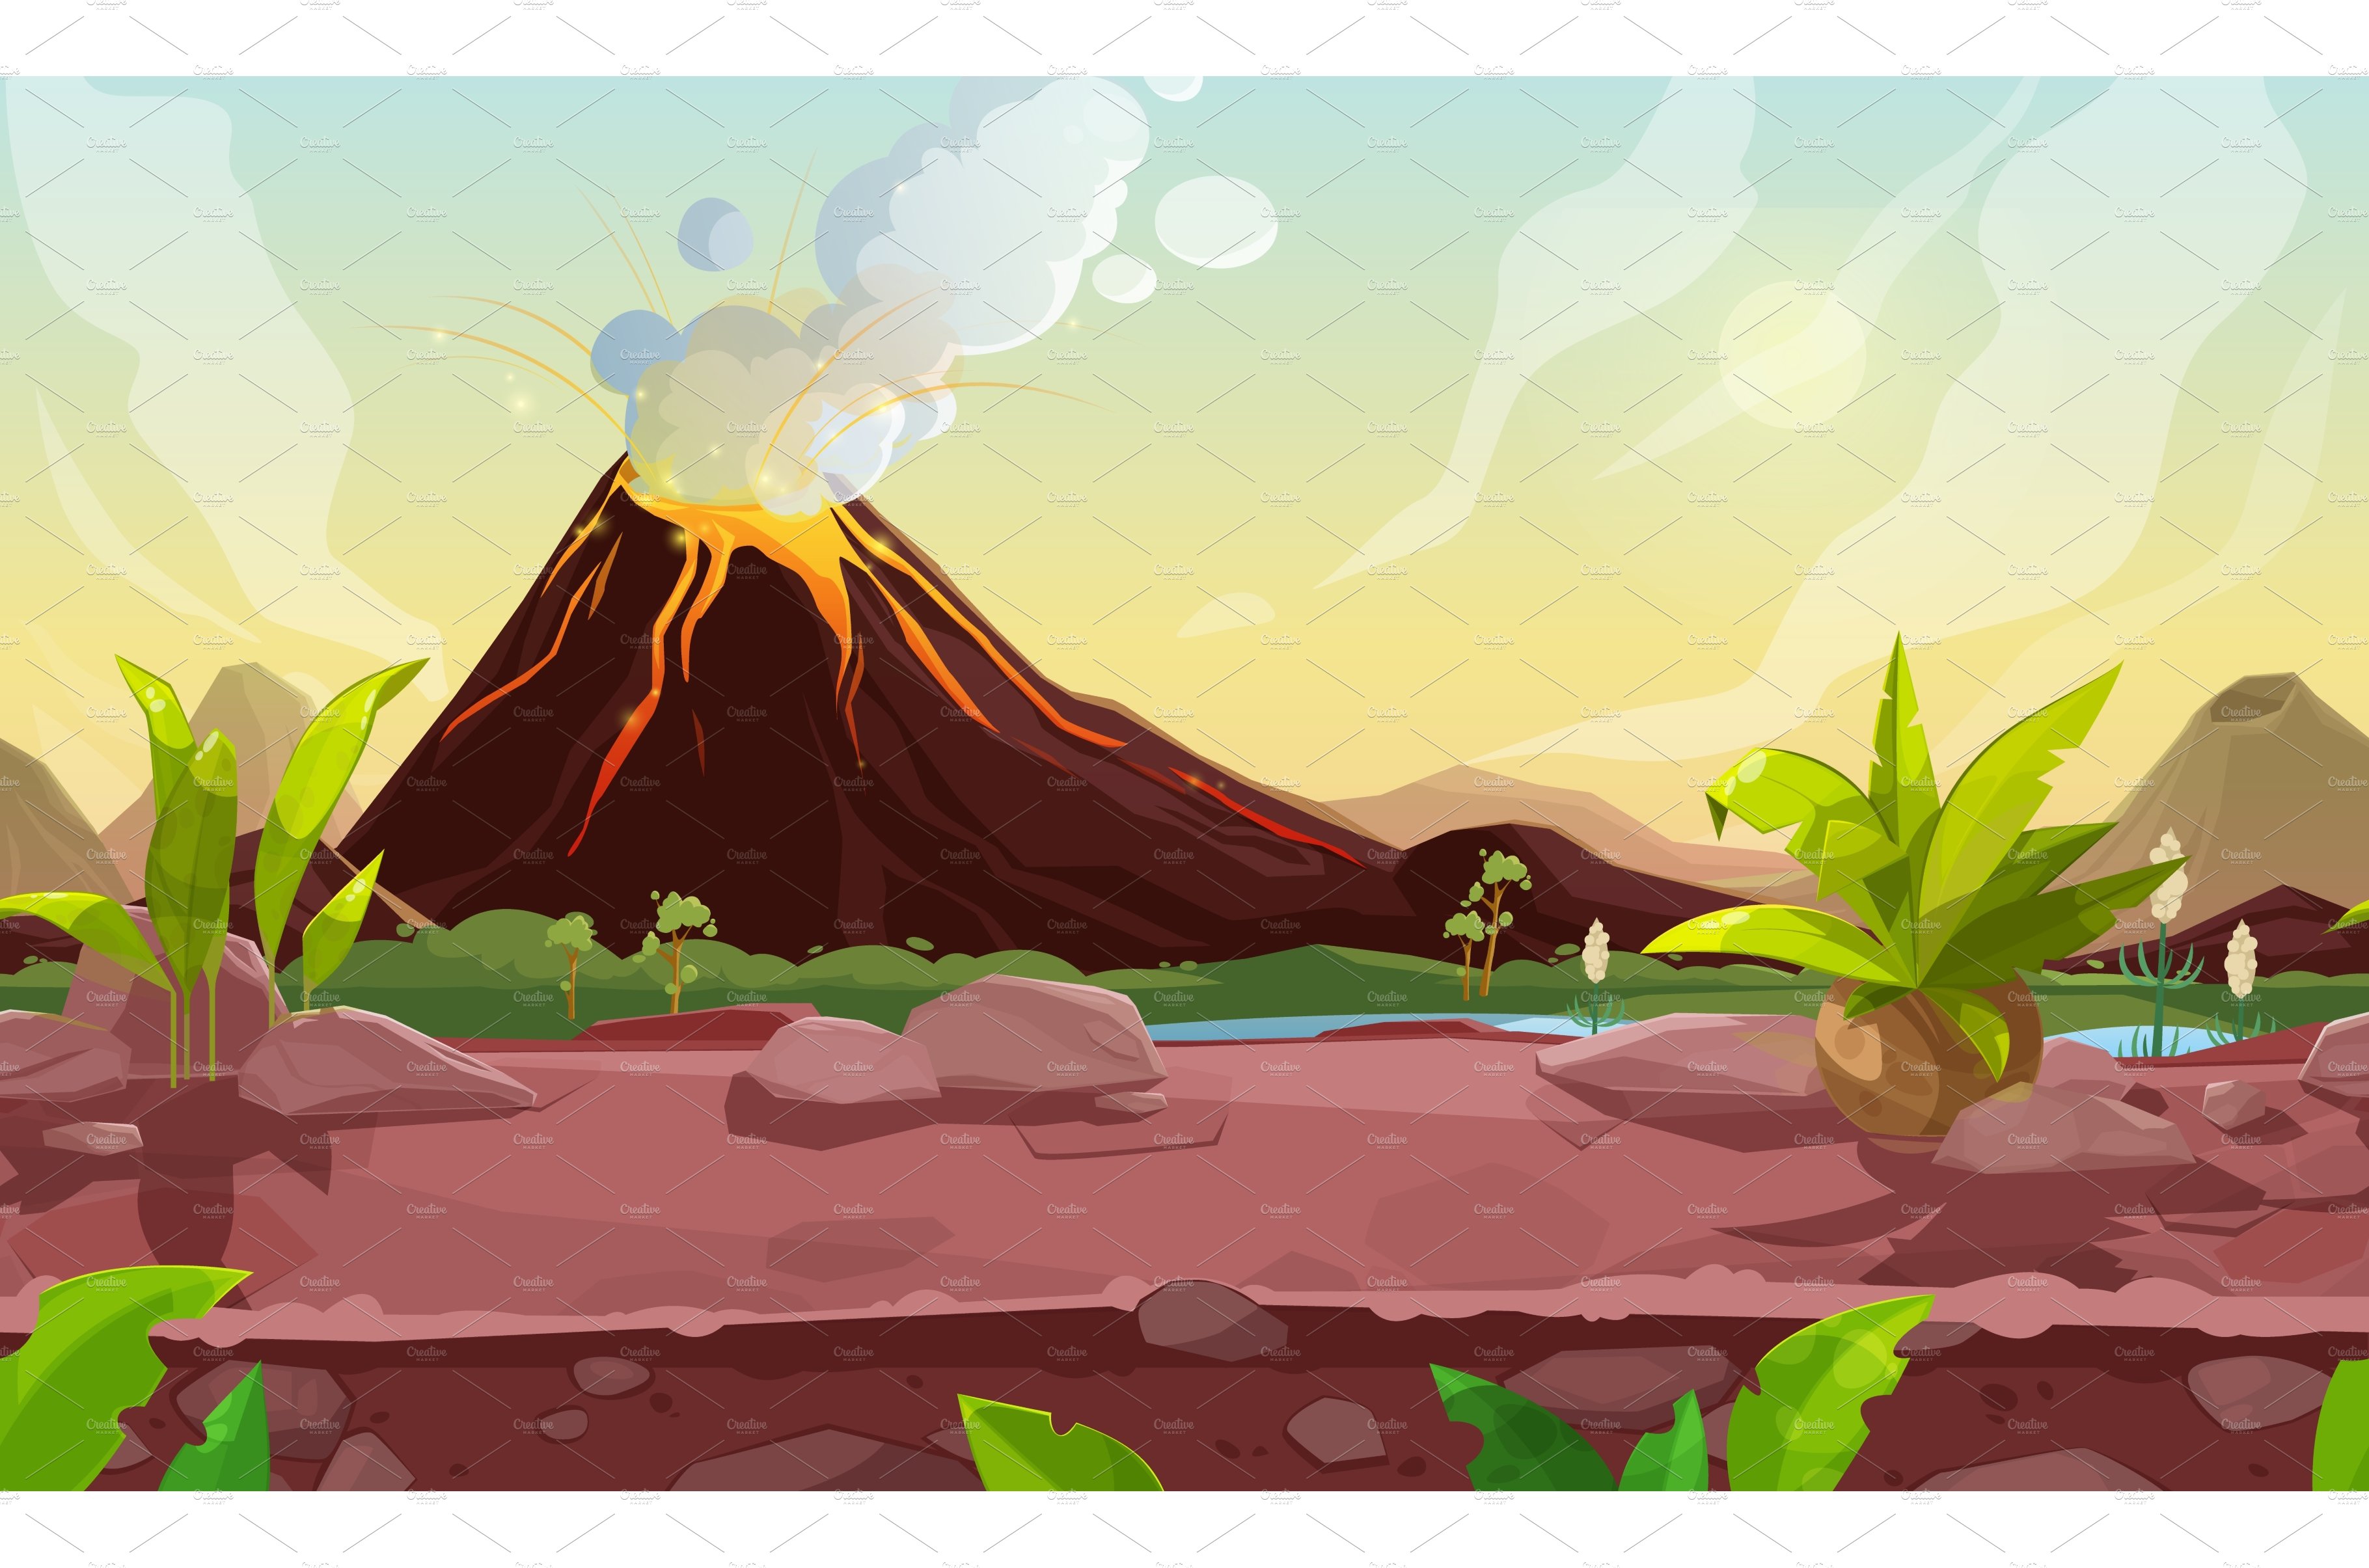 Prehistoric steaming volcano cover image.